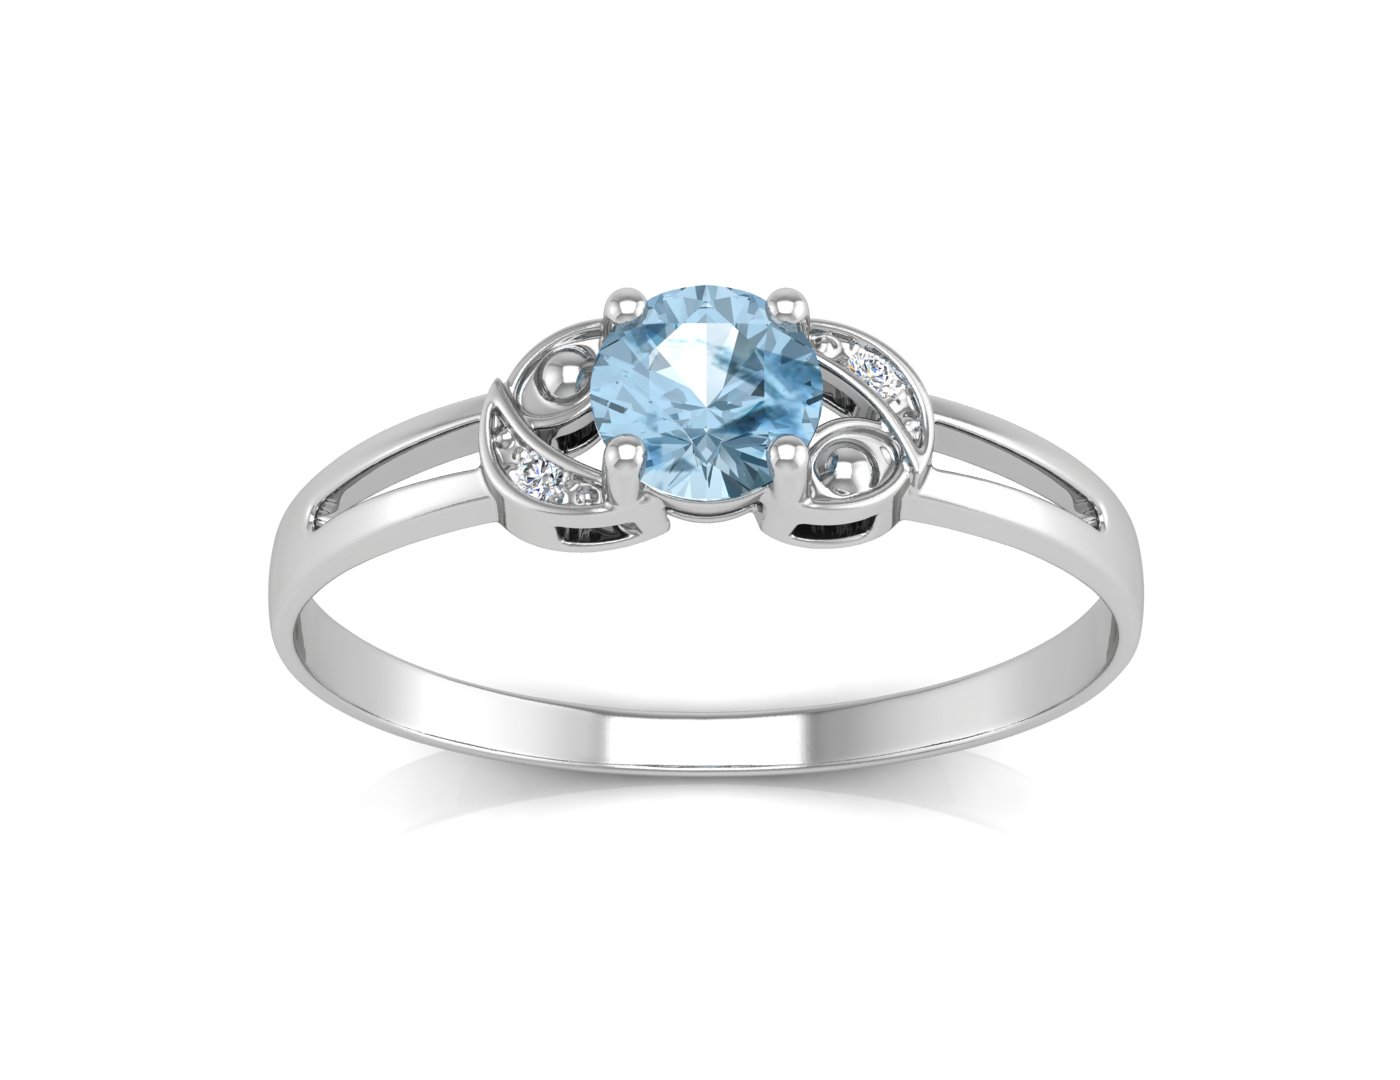 9k White Gold Fancy Cluster Diamond And Blue Topaz Ring 0.01 Carats - Image 3 of 4